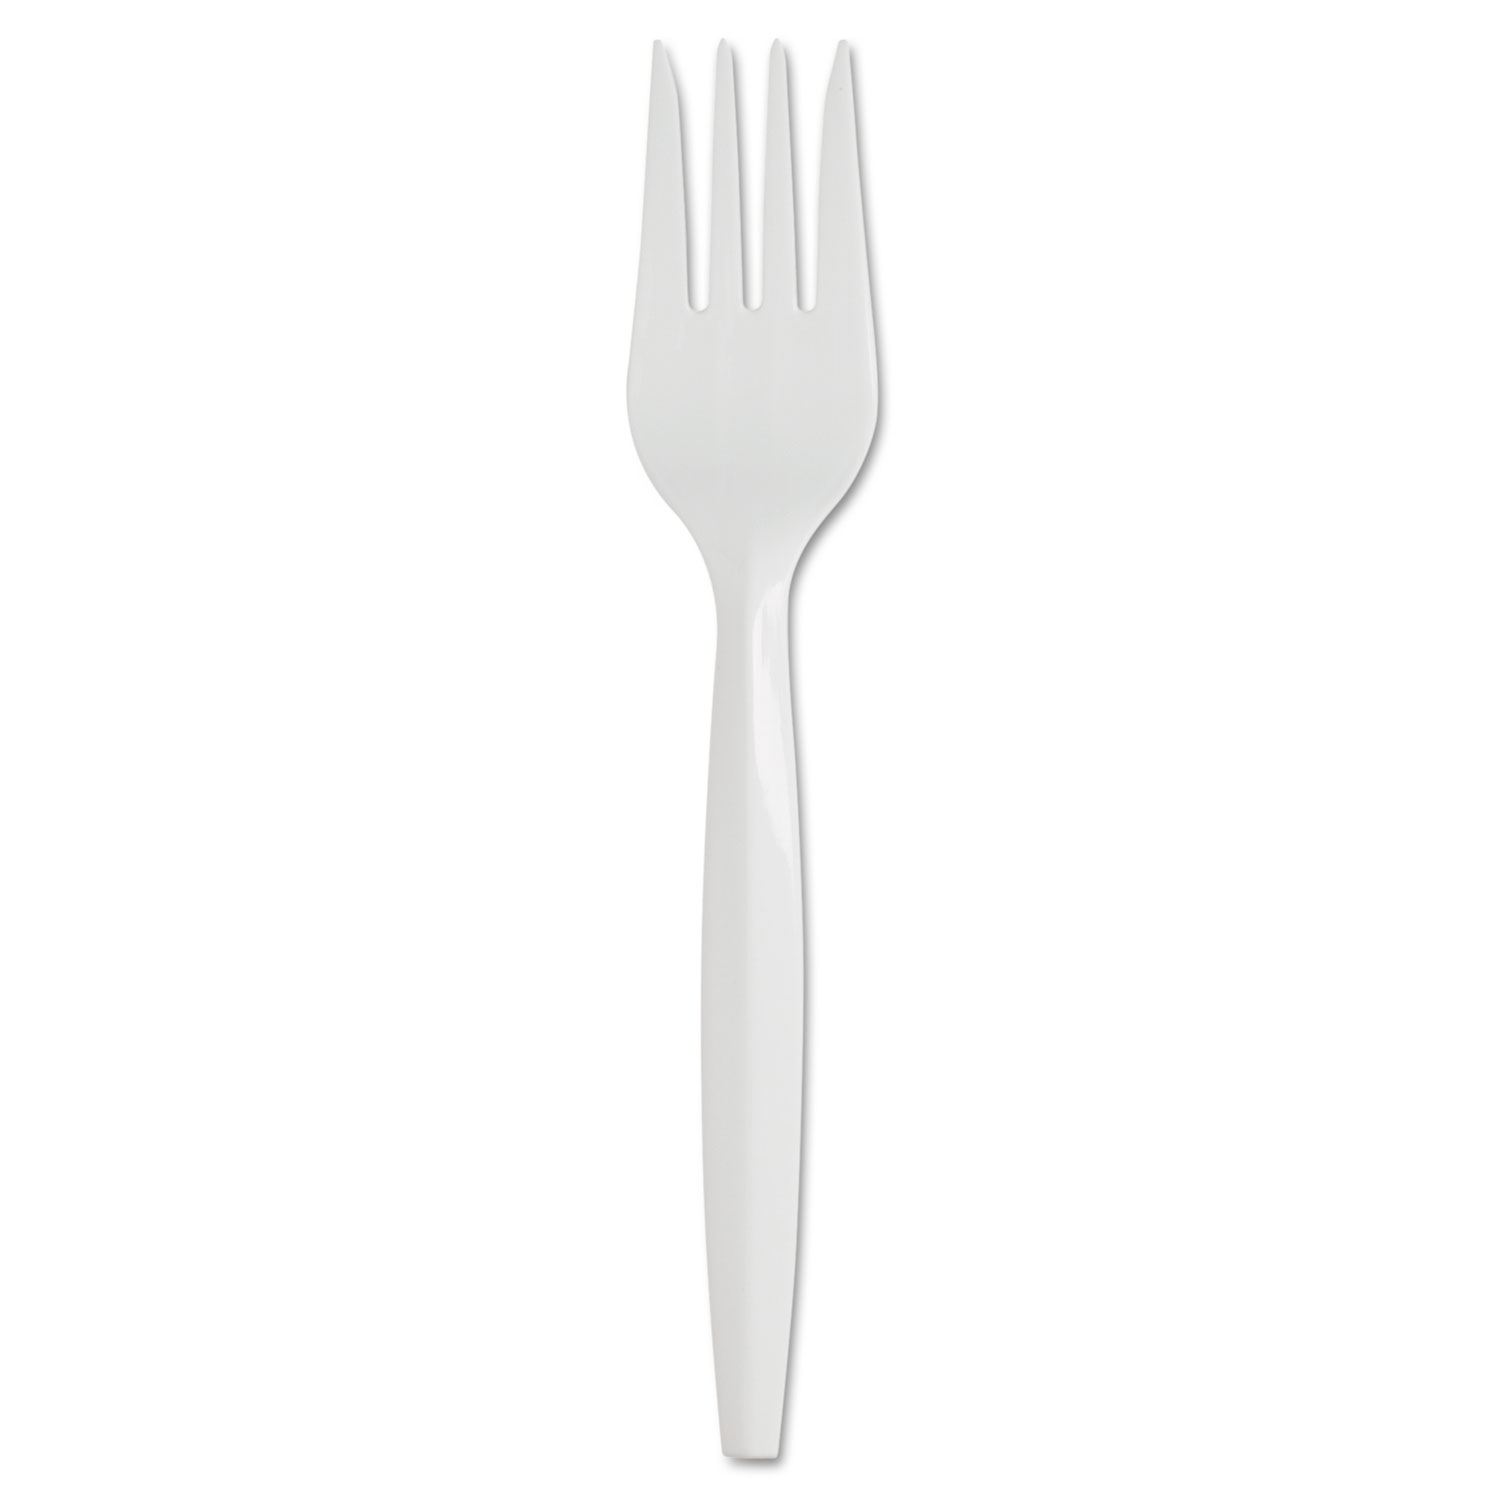  Dixie SSF21P SmartStock Plastic Cutlery Refill, 5.8in, Fork, White, 40/Pack, 24 Packs/Carton (DXESSF21P) 